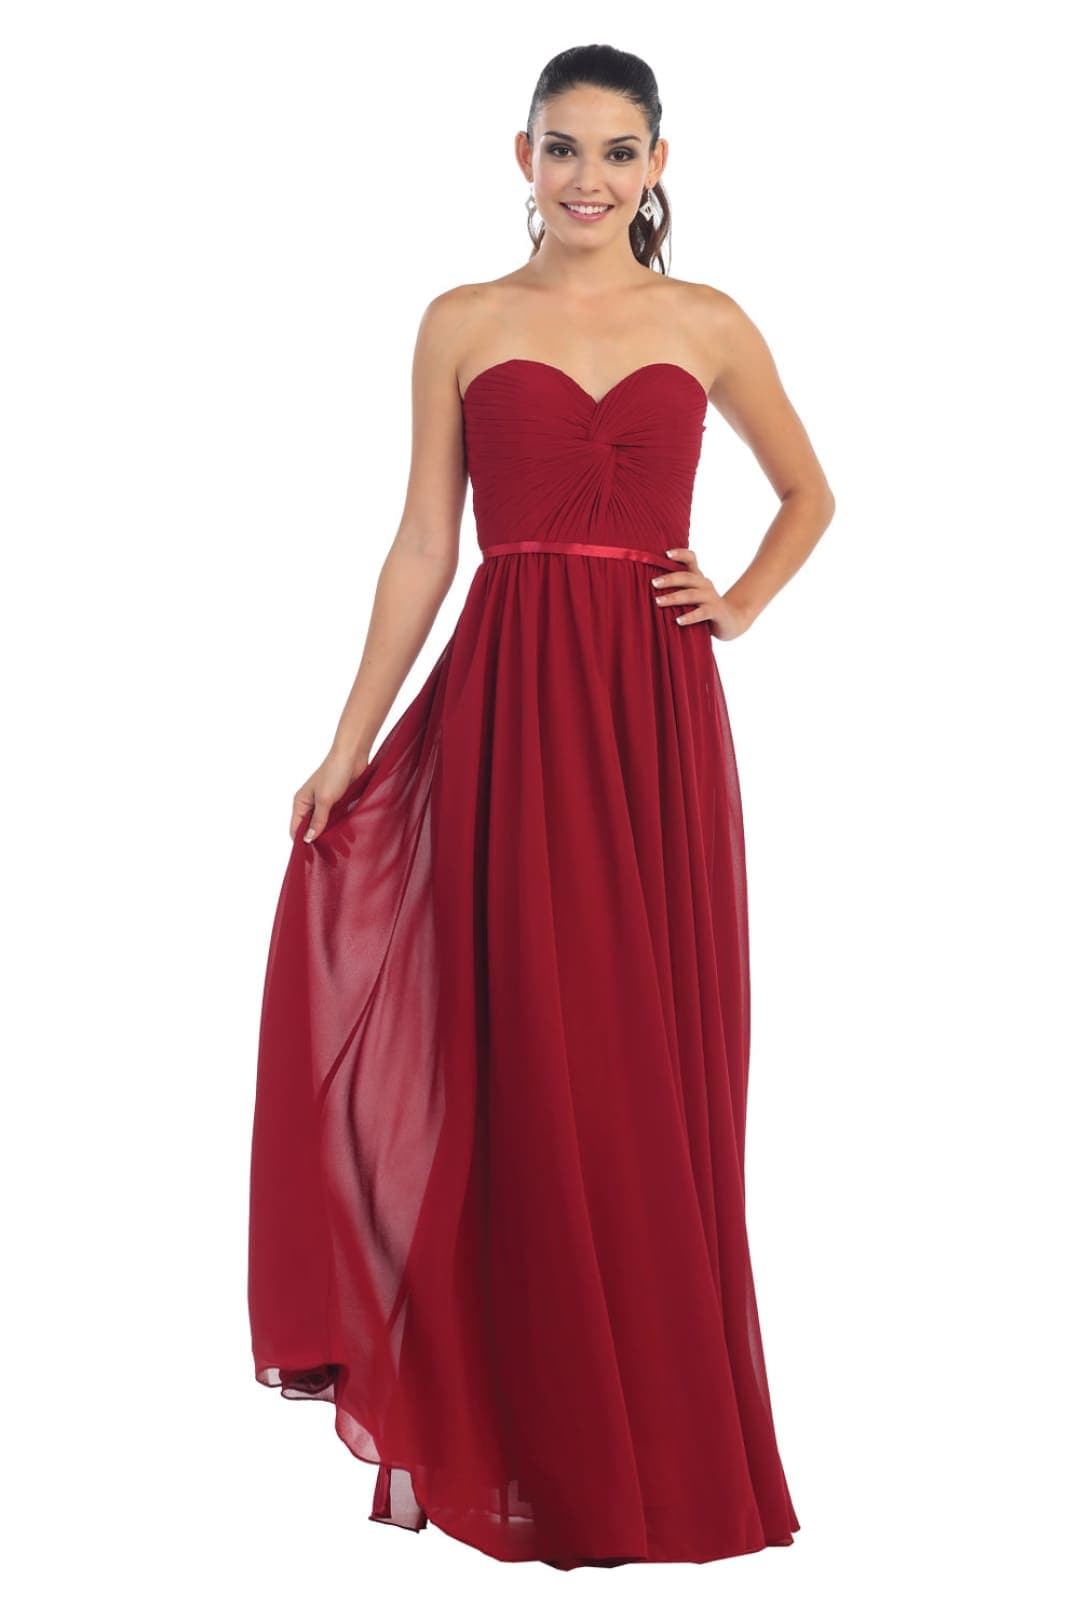 May Queen MQ1145 Sweetheart Lace Up Back Long Bridesmaids Dress - Burgundy / 24